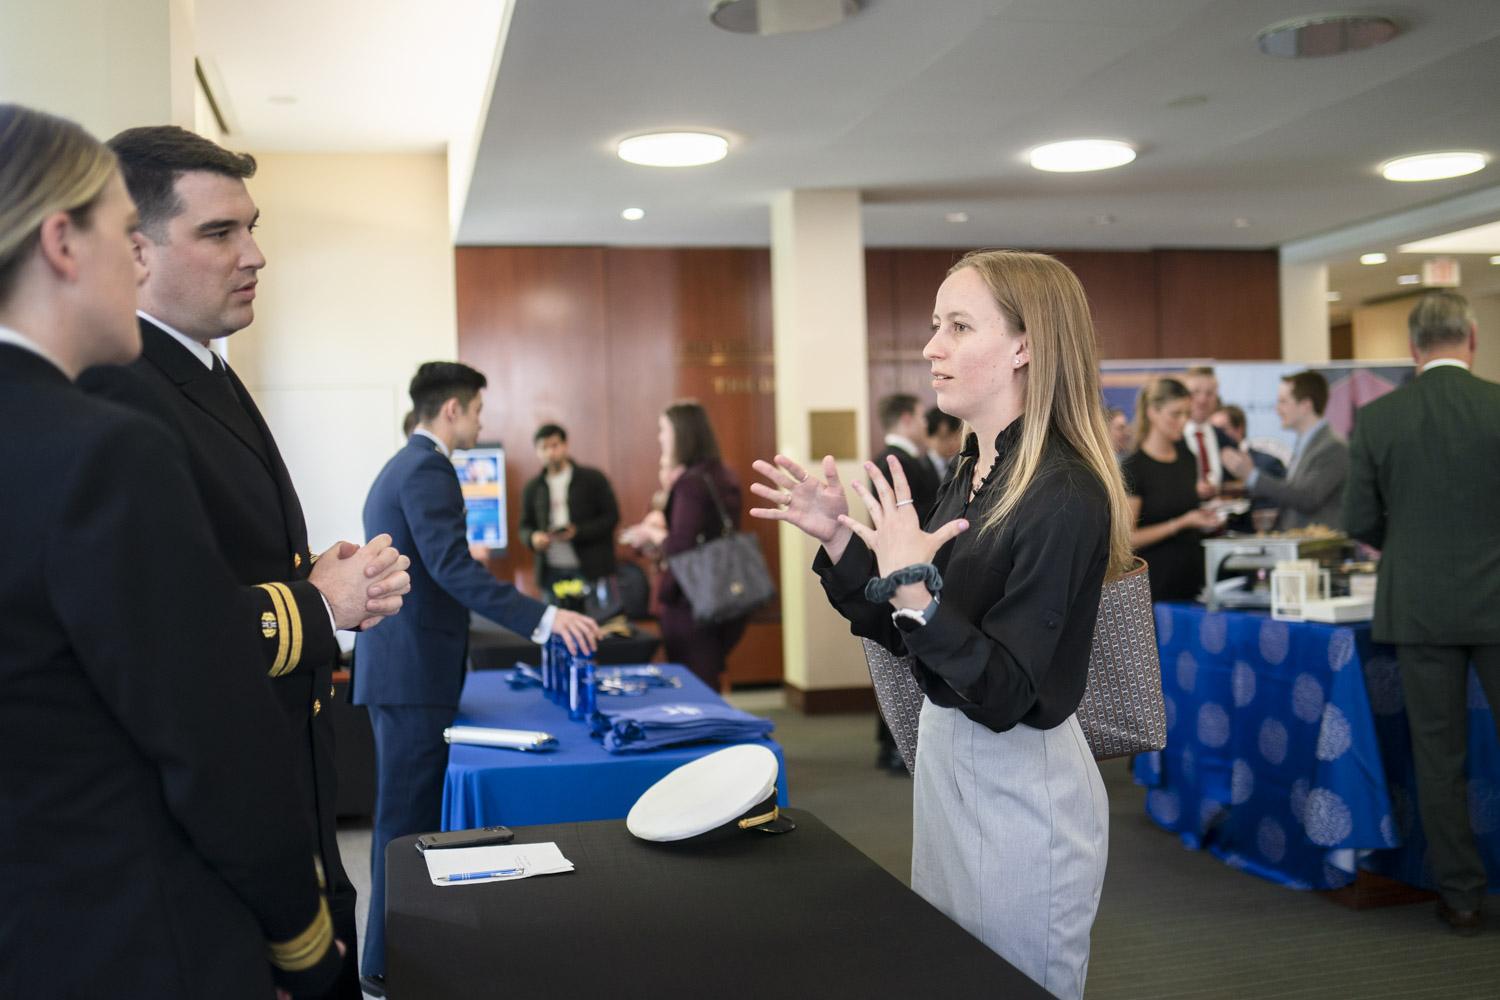 A student talking to military members at a reception